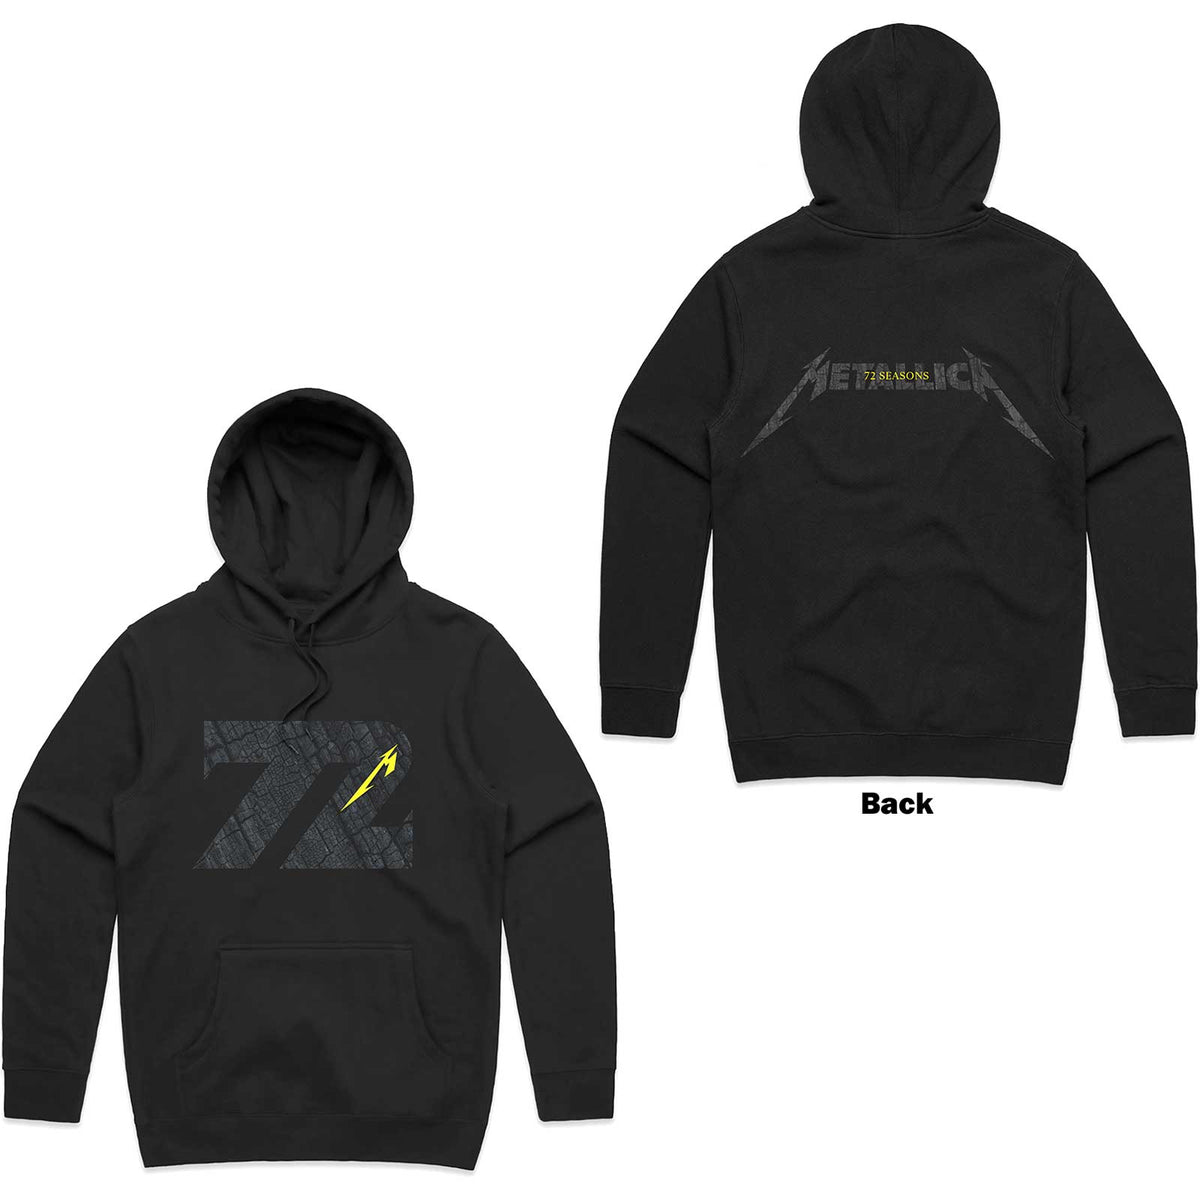 Metallica Unisex Hoodie - 72 Seasons Charred Logo (Back Print) - Unisex Official Licensed Design - Worldwide Shipping - Jelly Frog